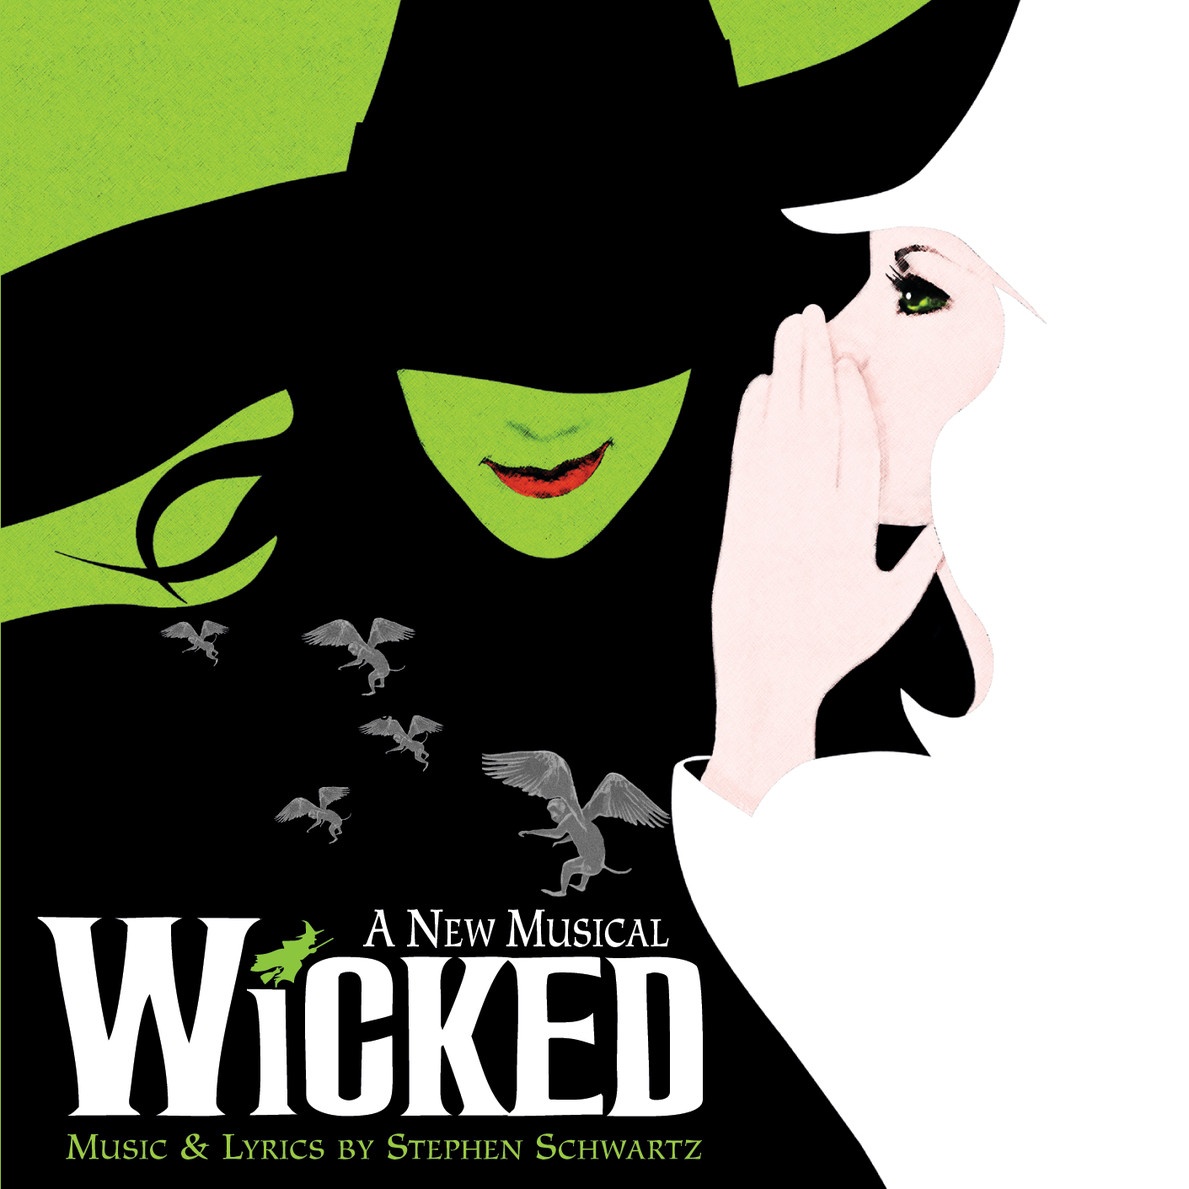 Thank Goodness - From "Wicked" Original Broadway Cast Recording/2003